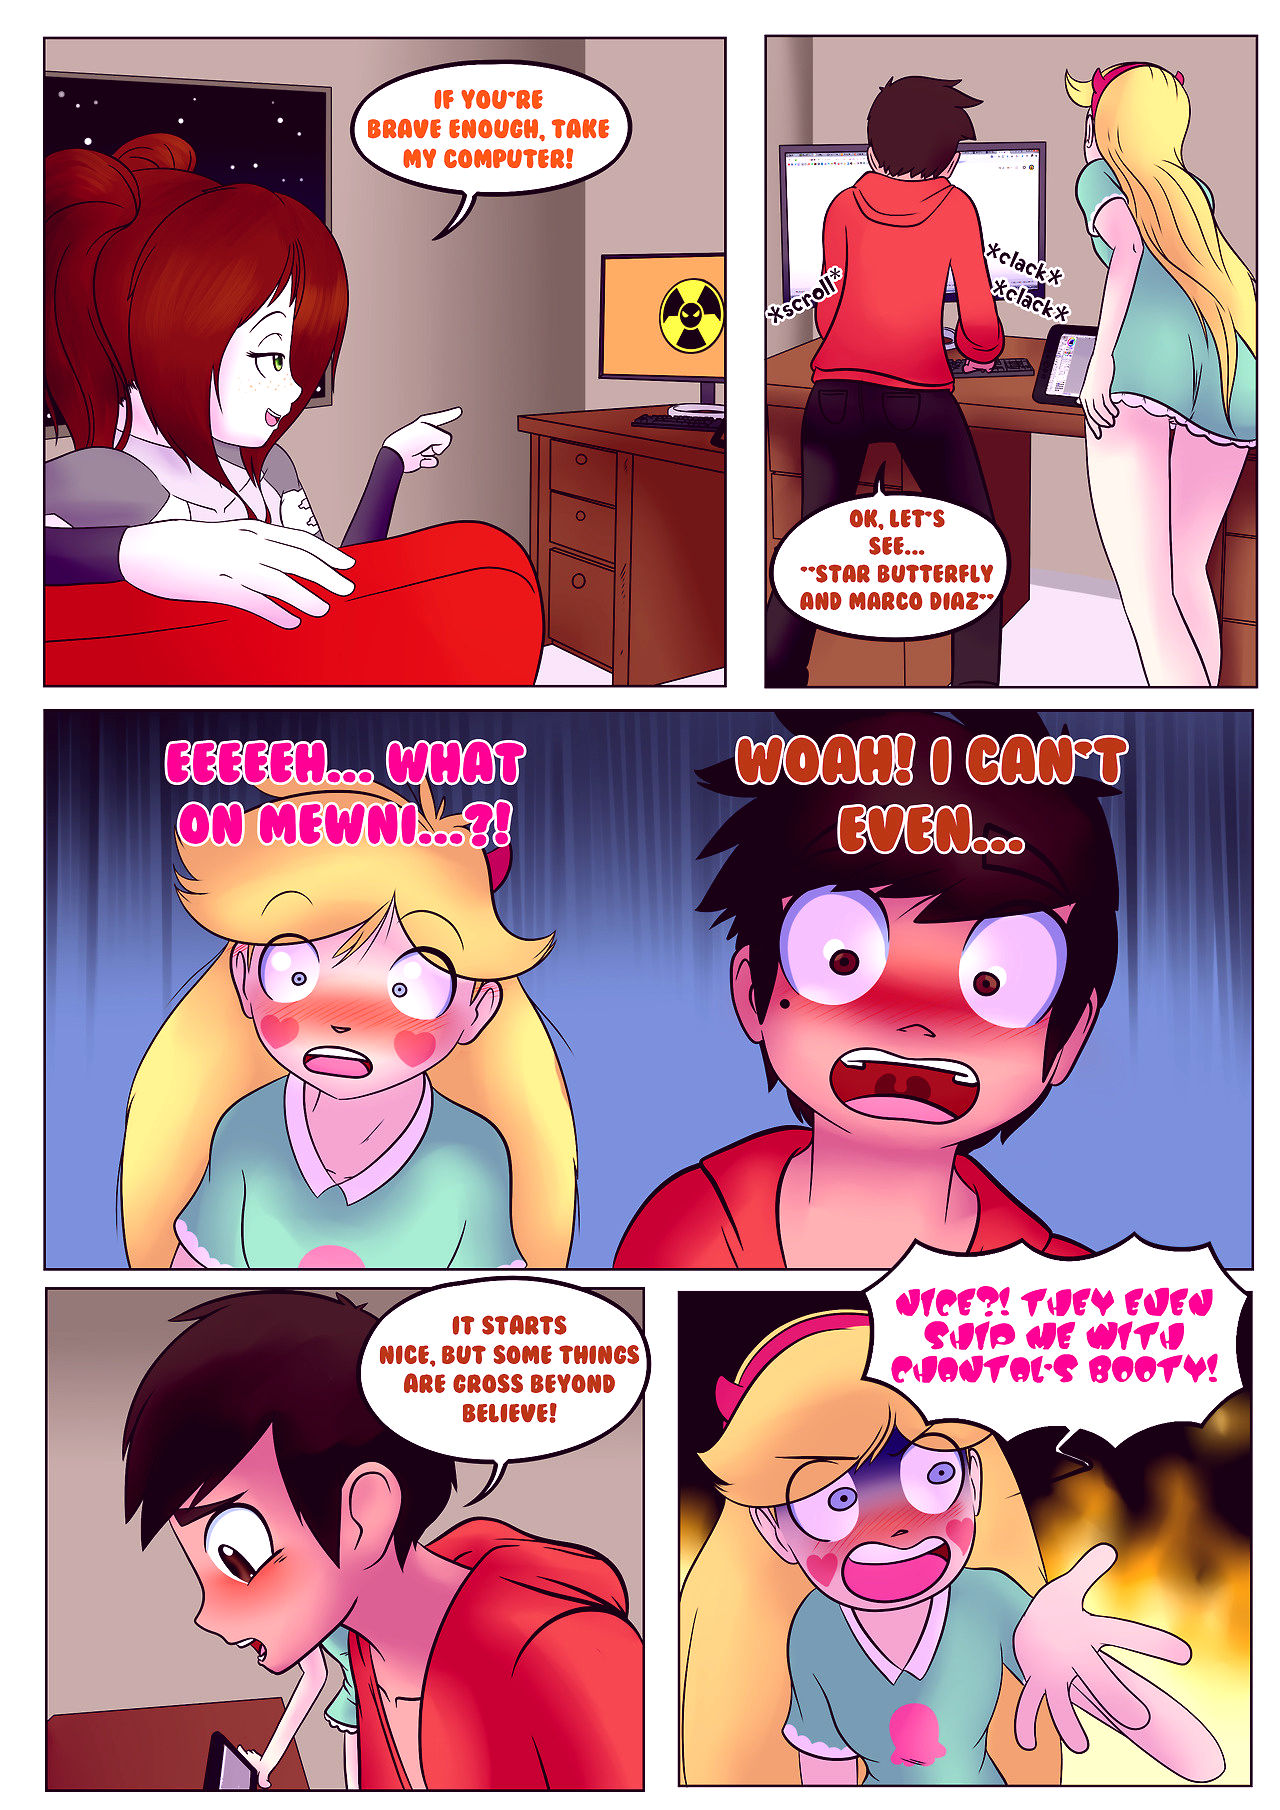 Between dimensions porn comic picture 07